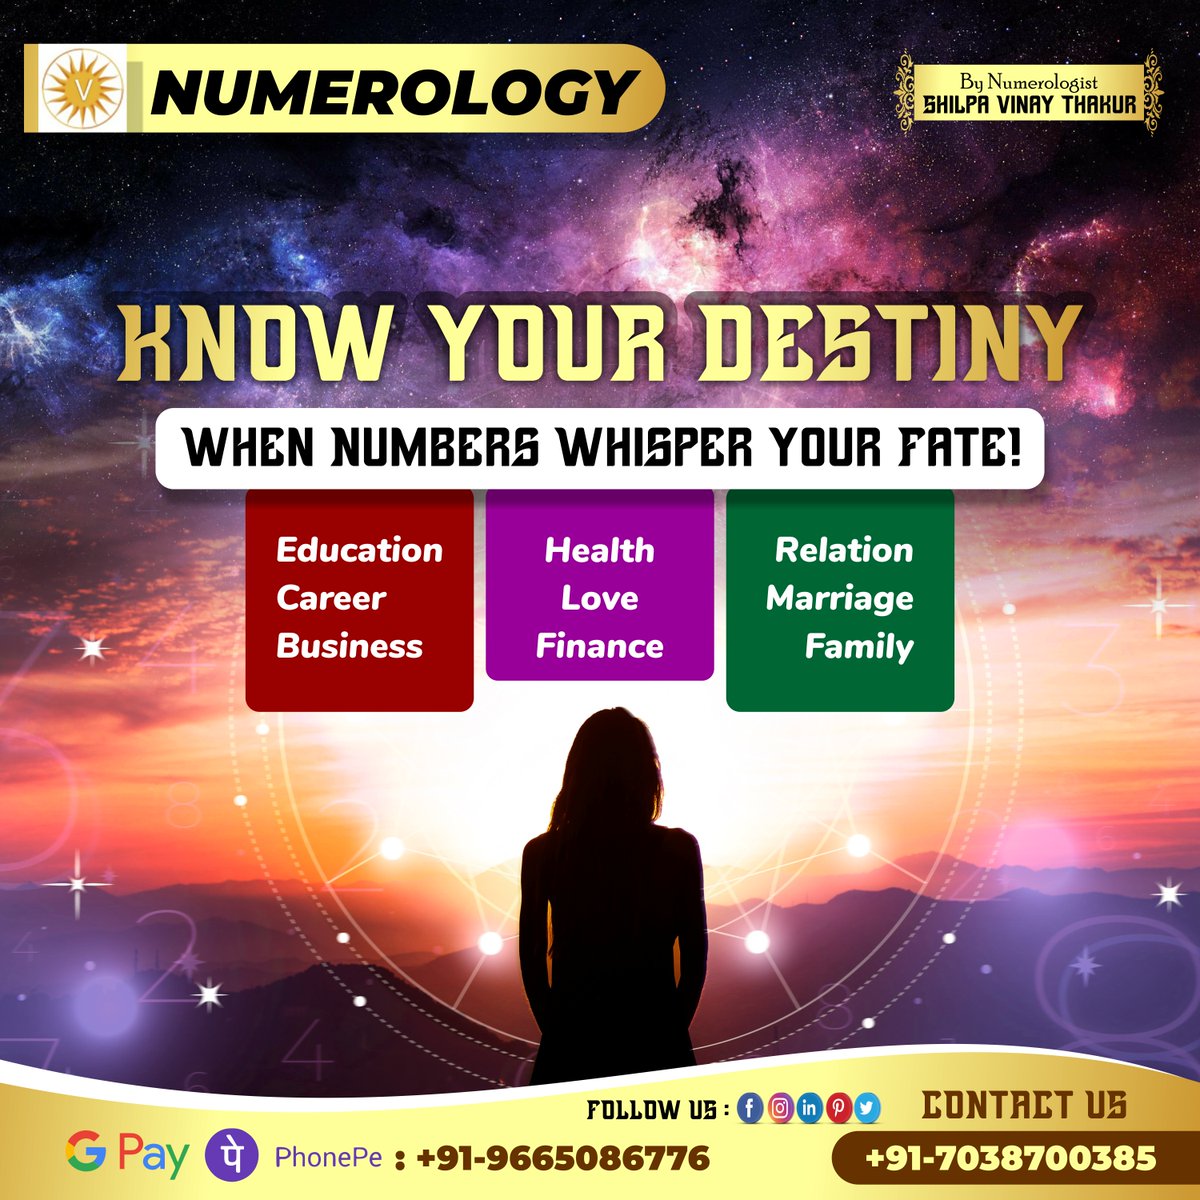 Unlock the Secrets of Your Life's Numbers with Numerology! 🔢✨ Discover the path to your true self and destiny. 
☎️ 9665086776 / 070387 00385
#NumerologyRevealed #LifeByNumbers #DiscoverYourPath #numerology #destiny #garbhsanskar #maharashtra #Indian2